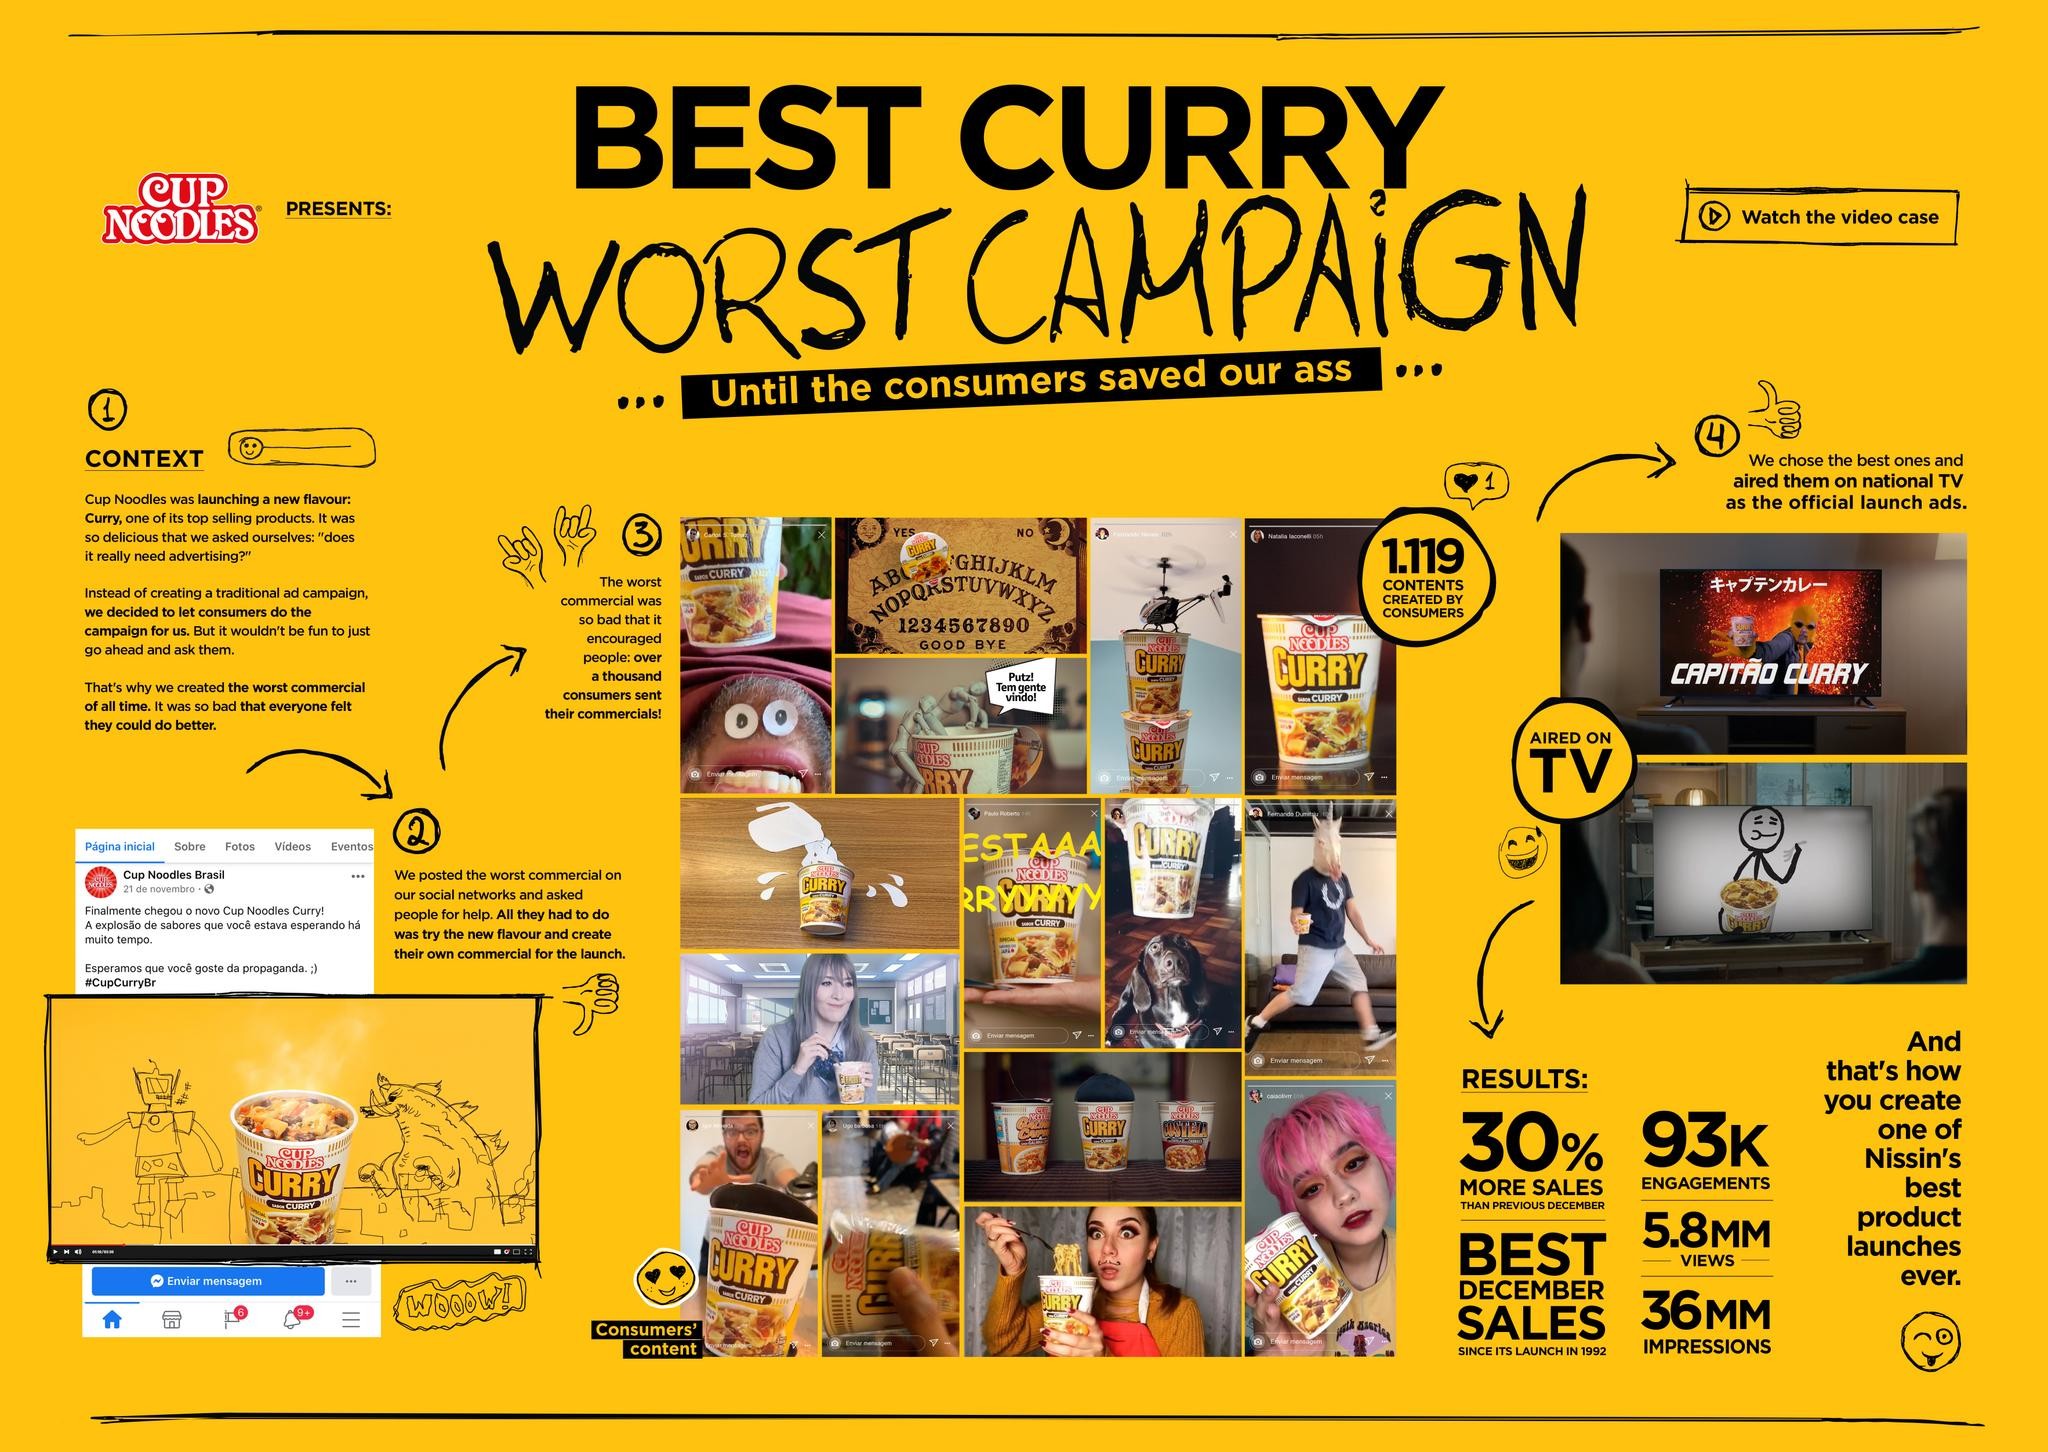 THE WORST CAMPAIGN / CUP NOODLE CURRY